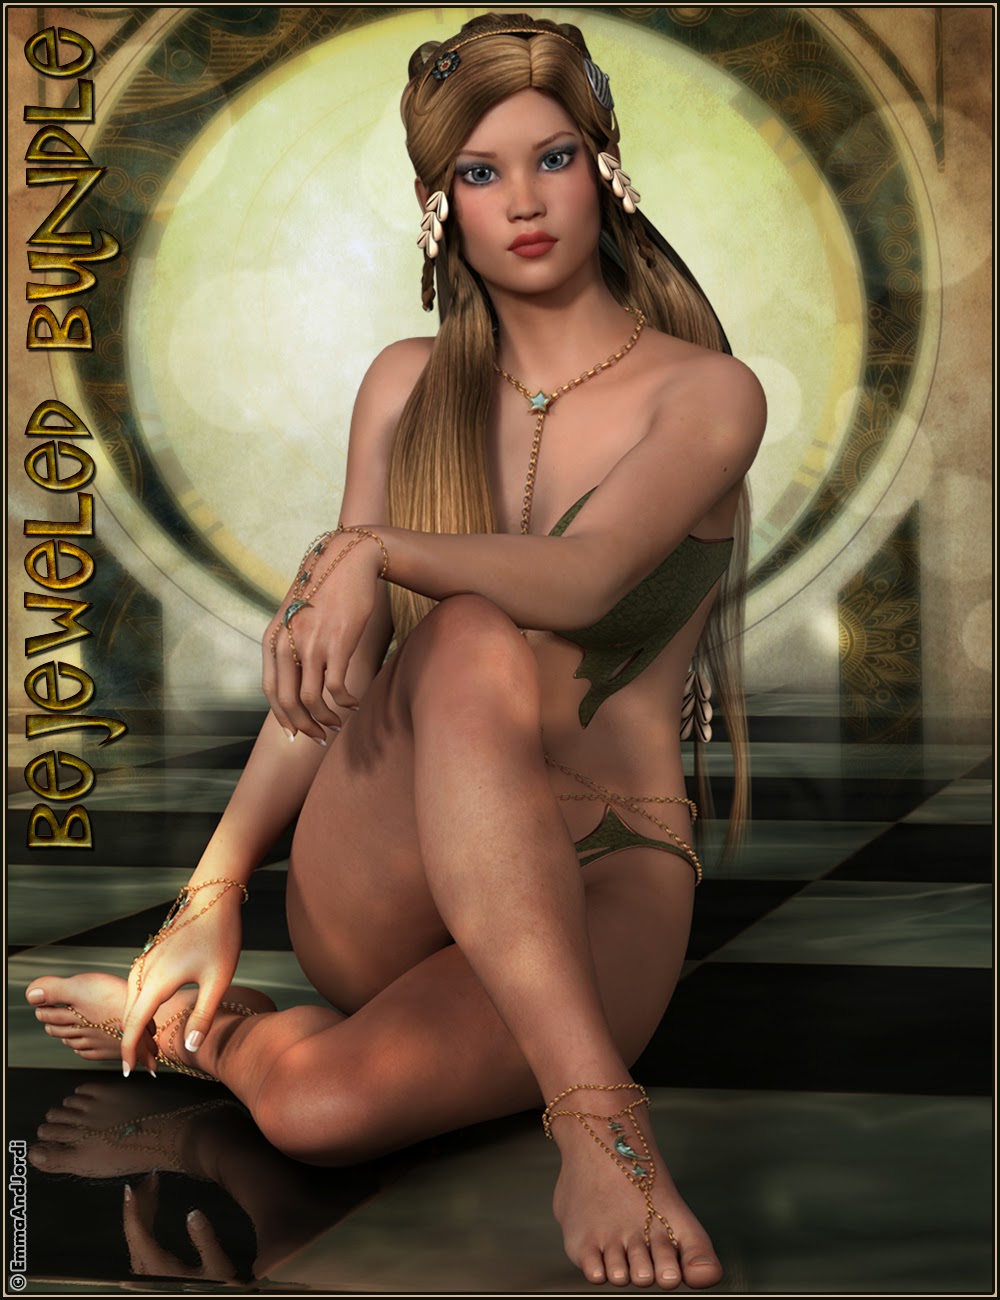 http://www.daz3d.com/bejeweled-bundle-belly-chains-and-hand-and-foot-jewelry